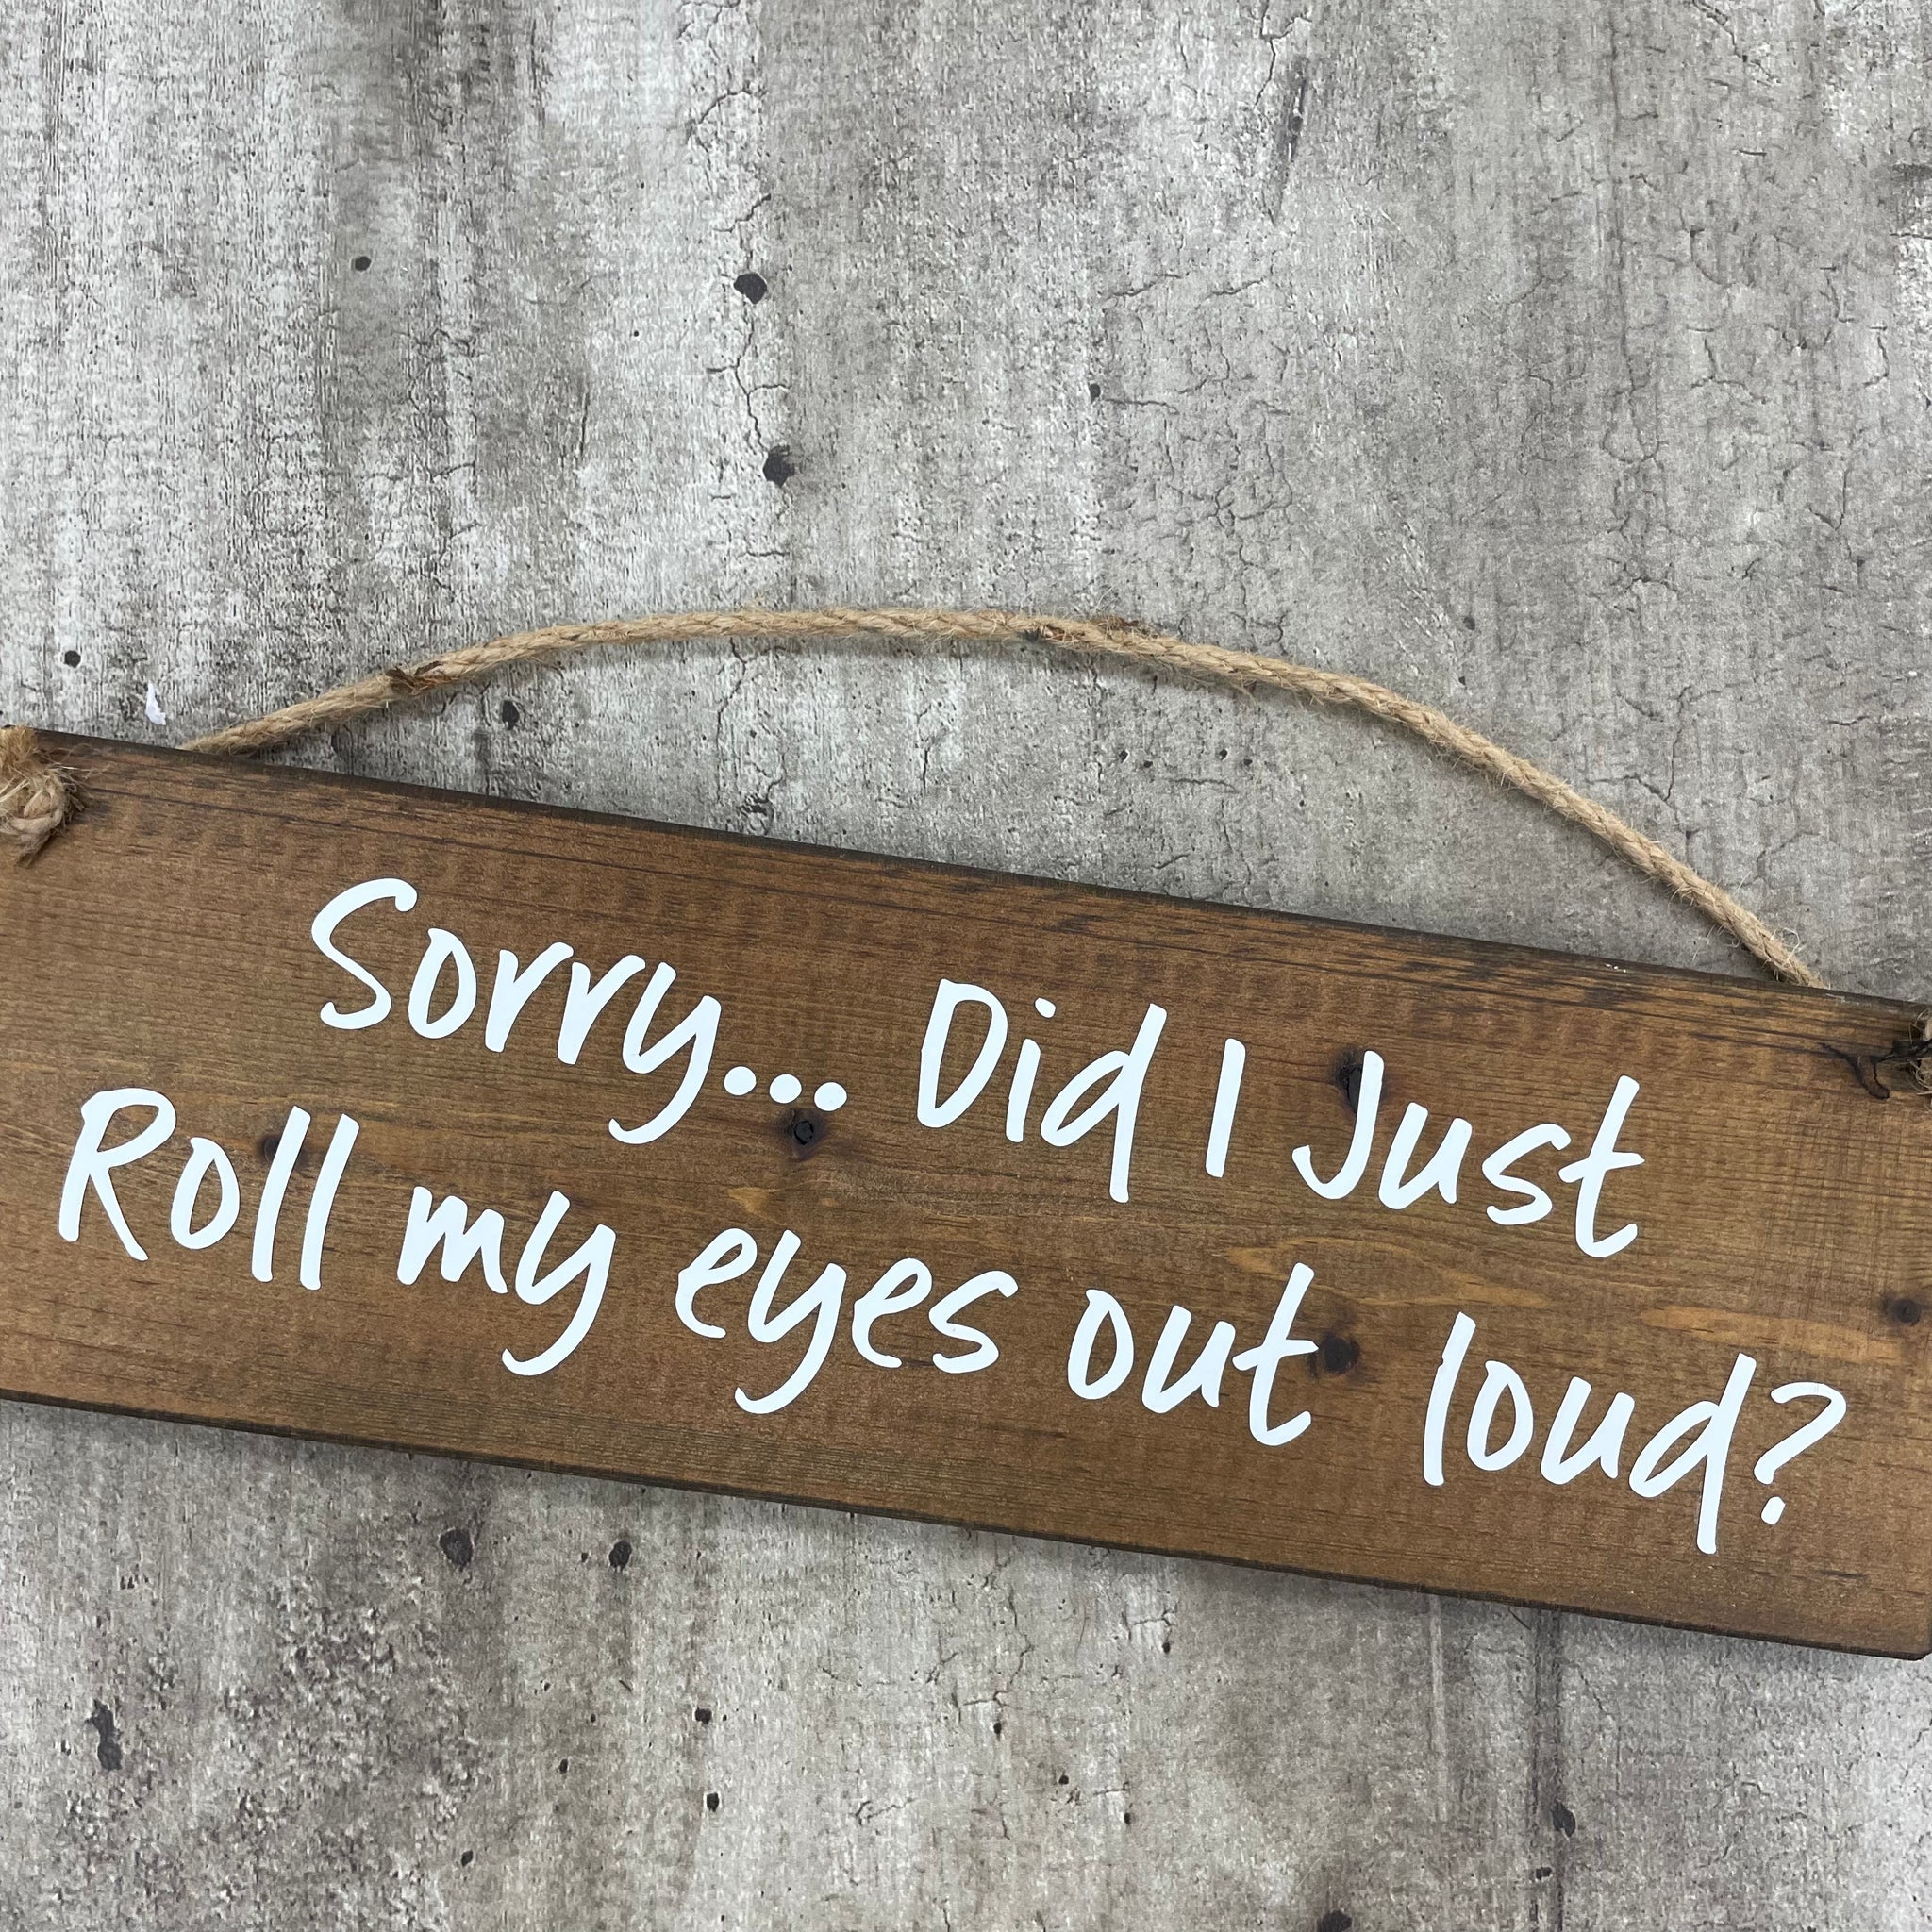 Wooden Hanging Sign - "Sorry... Did I just roll my eyes out loud?"